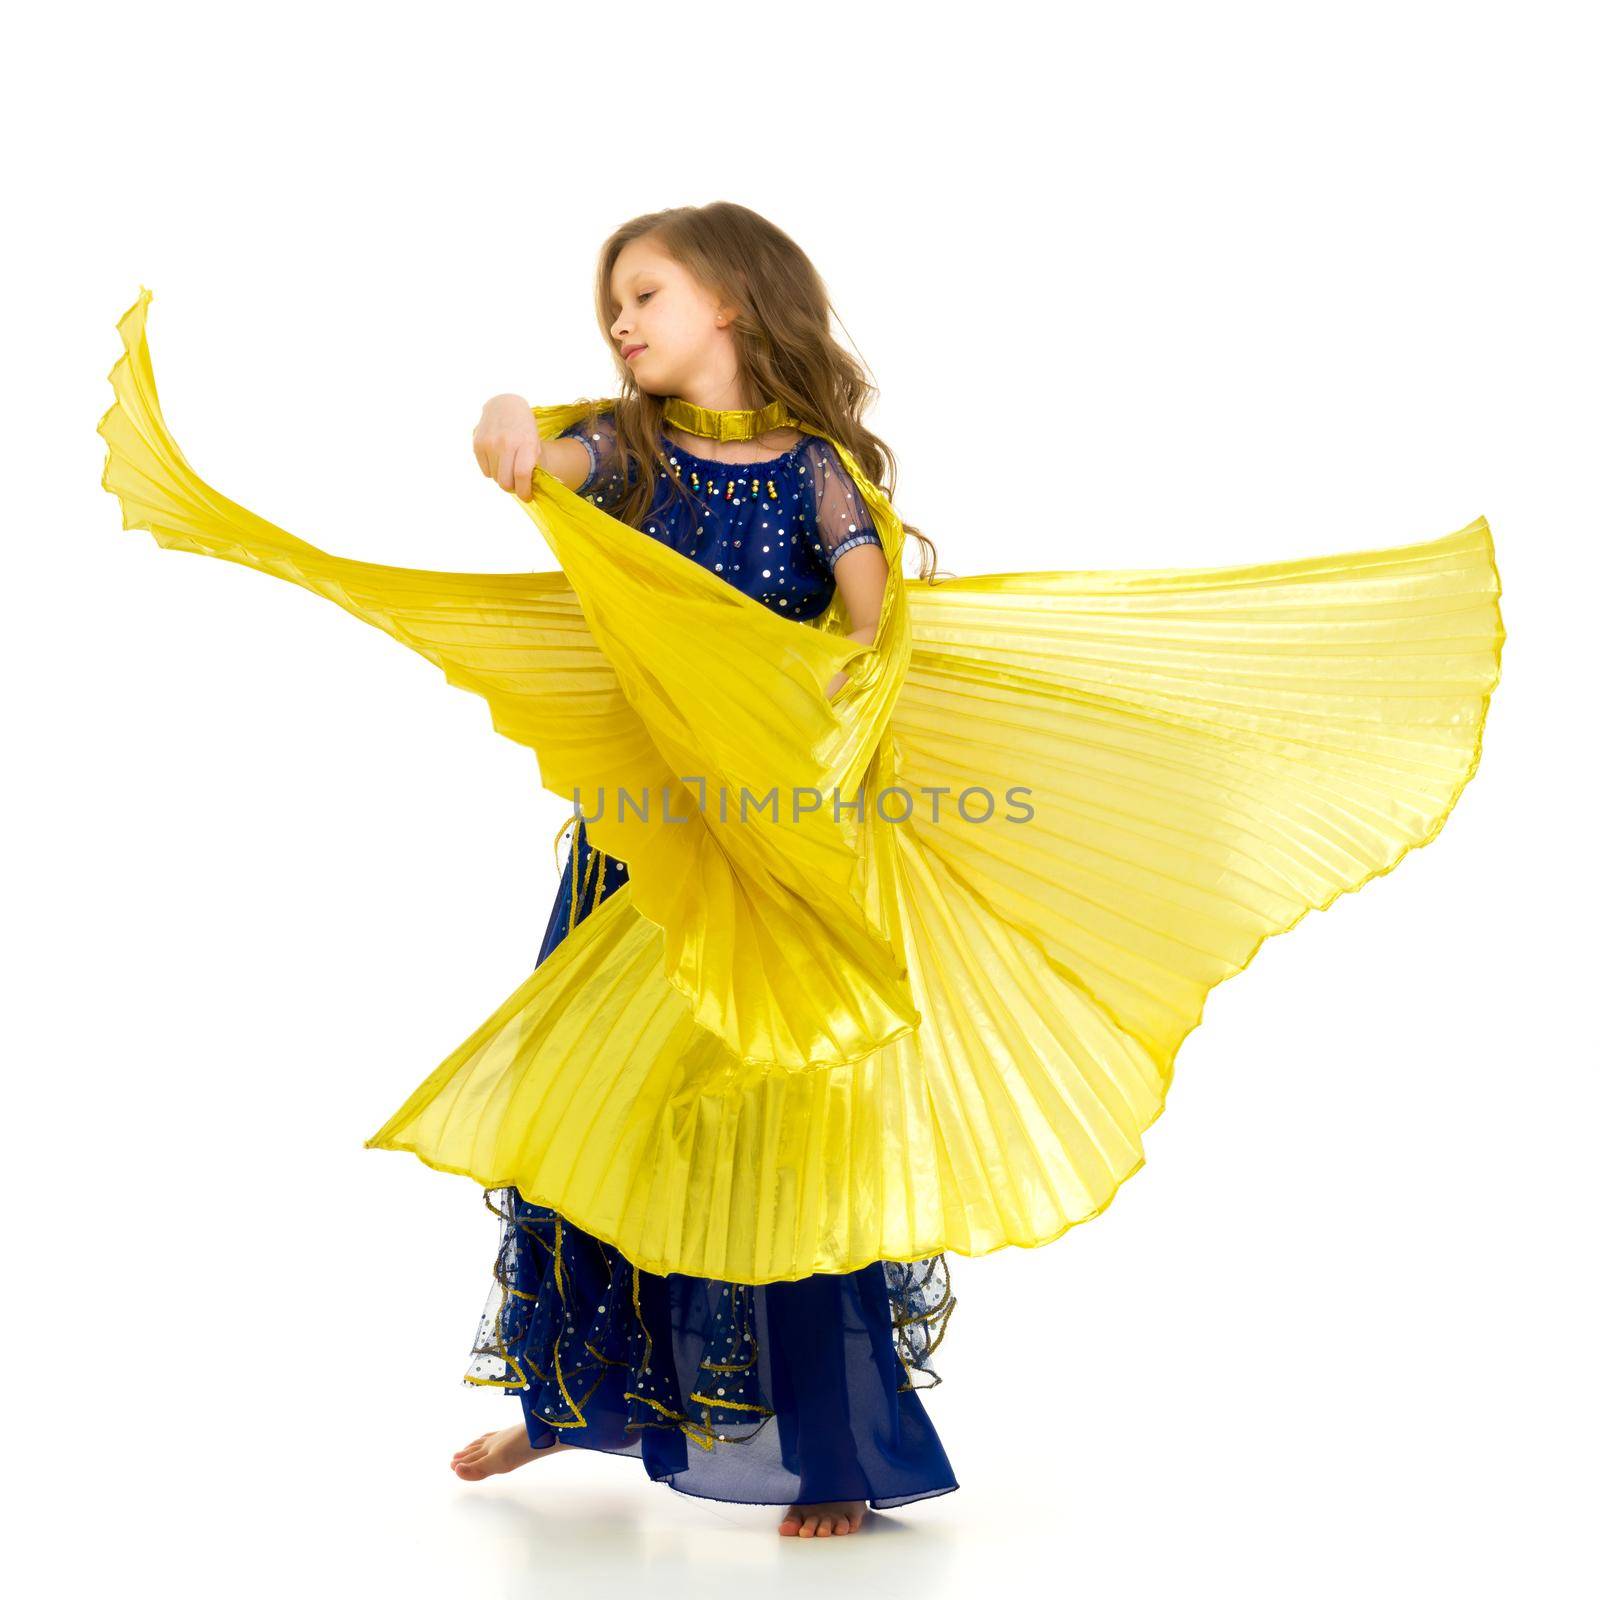 Beautiful Blonde Long Haired Girl Dancing Belly Dance with Wings, Lovely Child in Traditional Blue Decorated Oriental Costume Waving her Yellow Wings in Studio on Isolated White Background